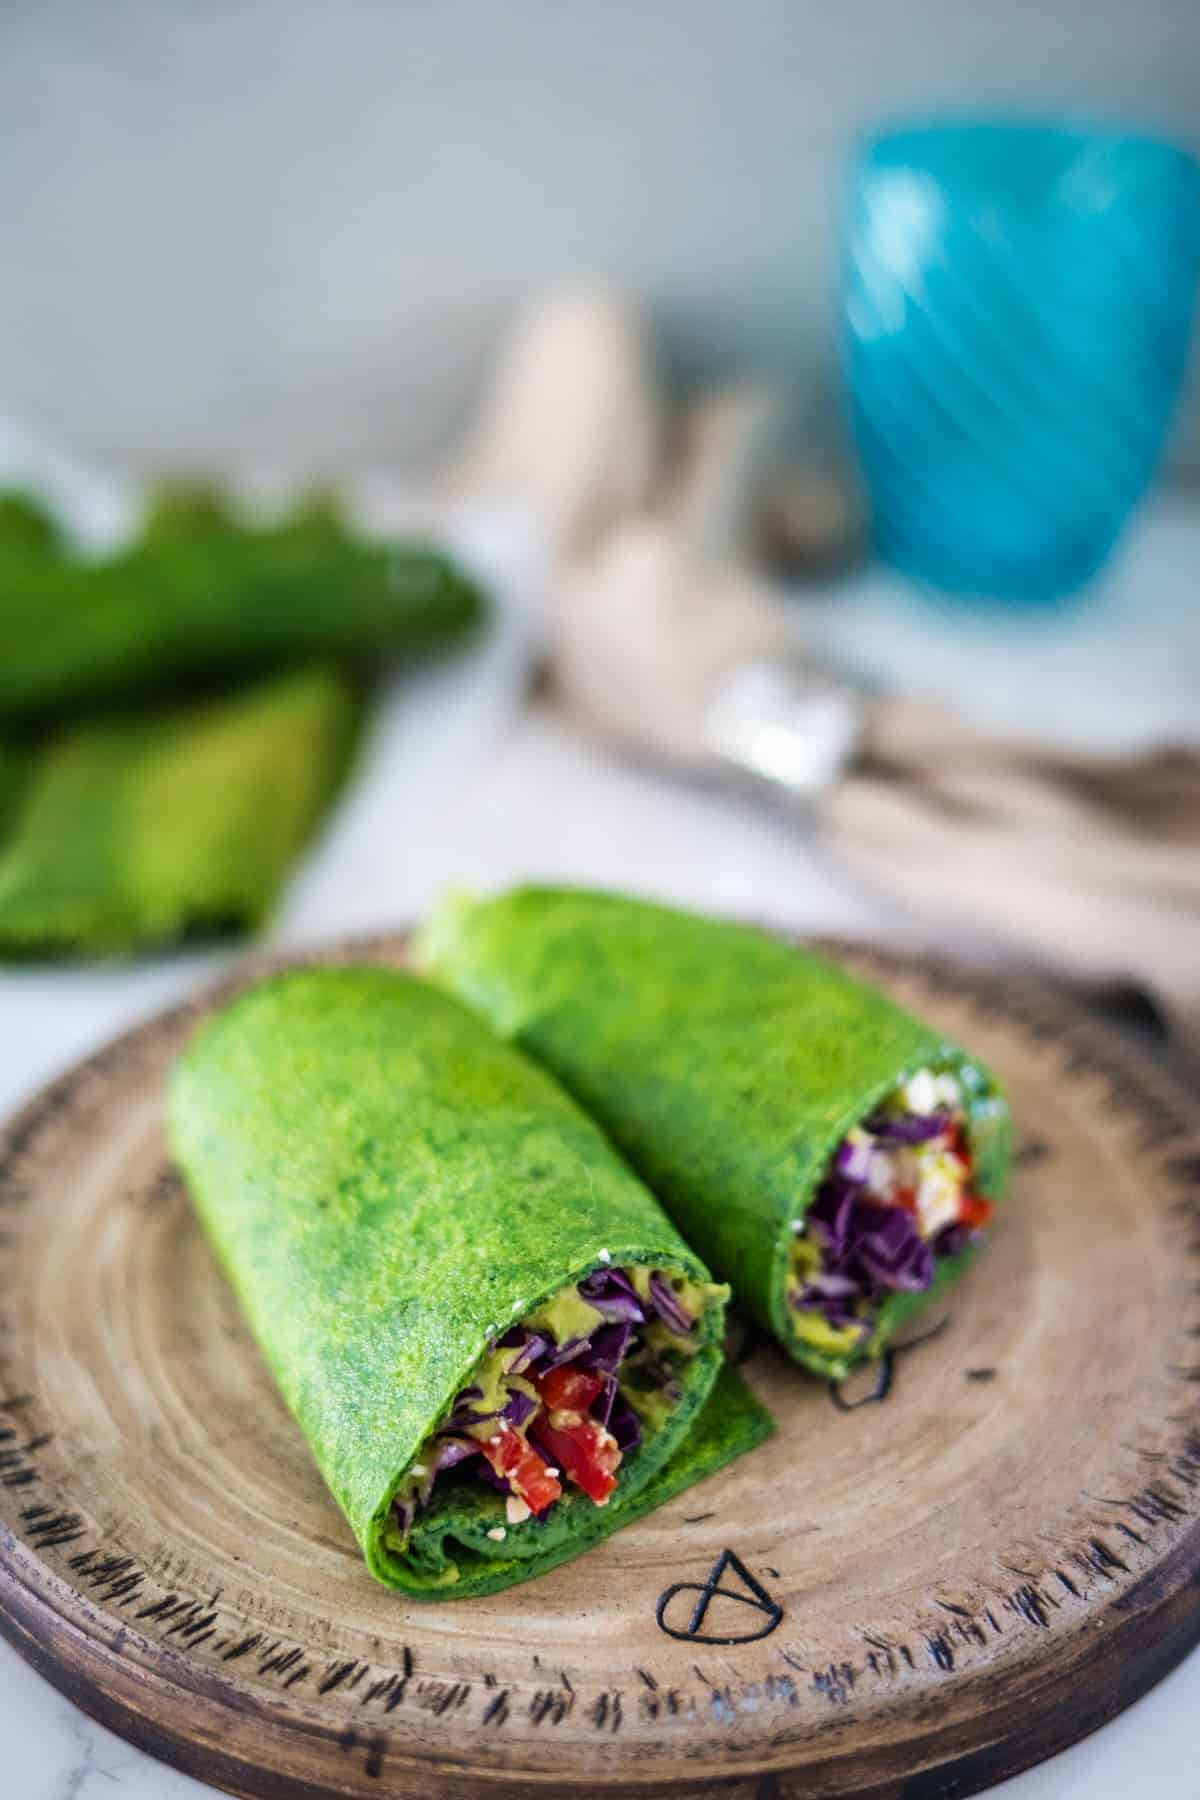 Two spinach wraps on a wooden plate.